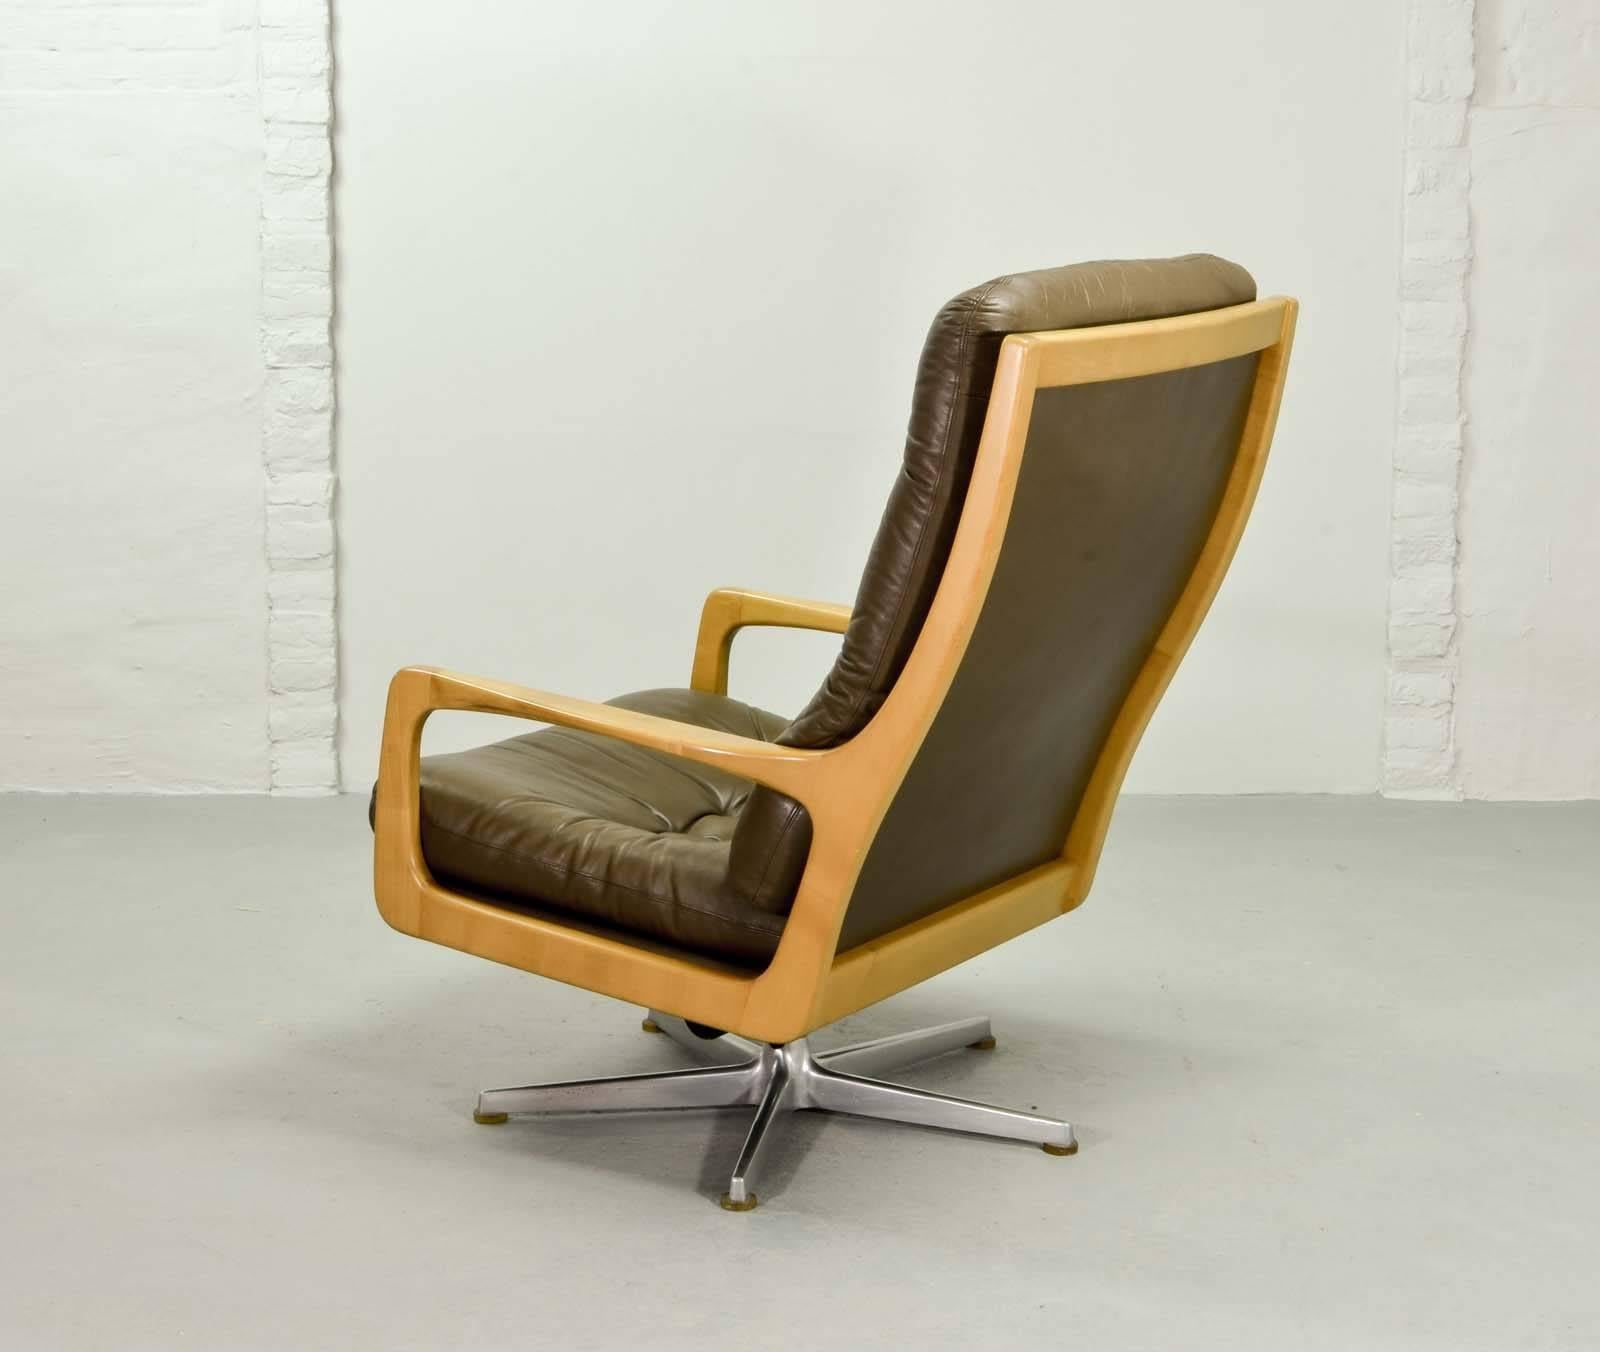 German Luxurious Leather Lounge Chair Designed by Eugen Schmidt, 1970s